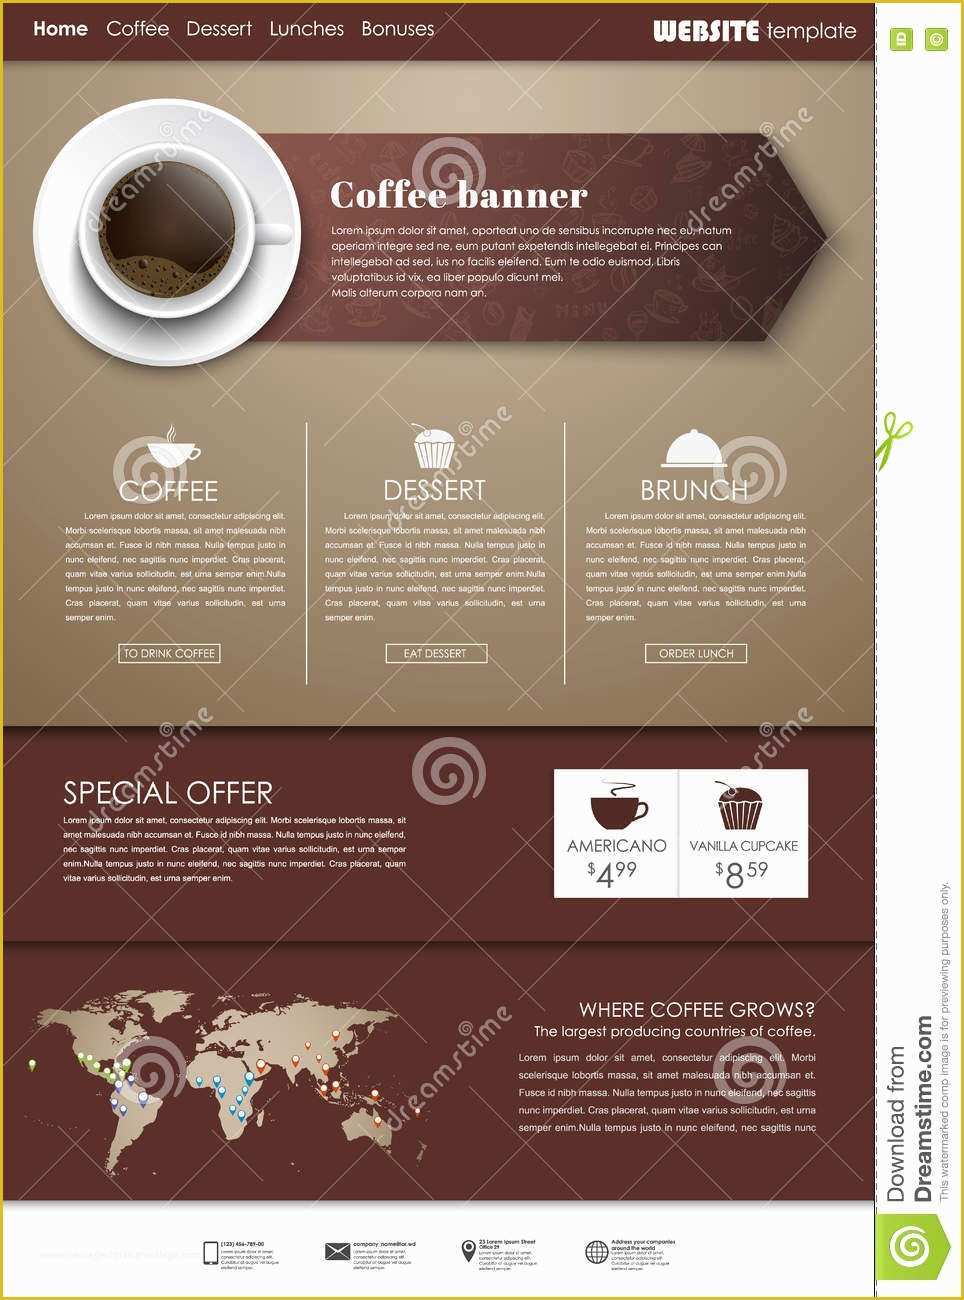 Coffee Shop Website Template Free Download Of Cafes Cartoons Illustrations & Vector Stock 1264